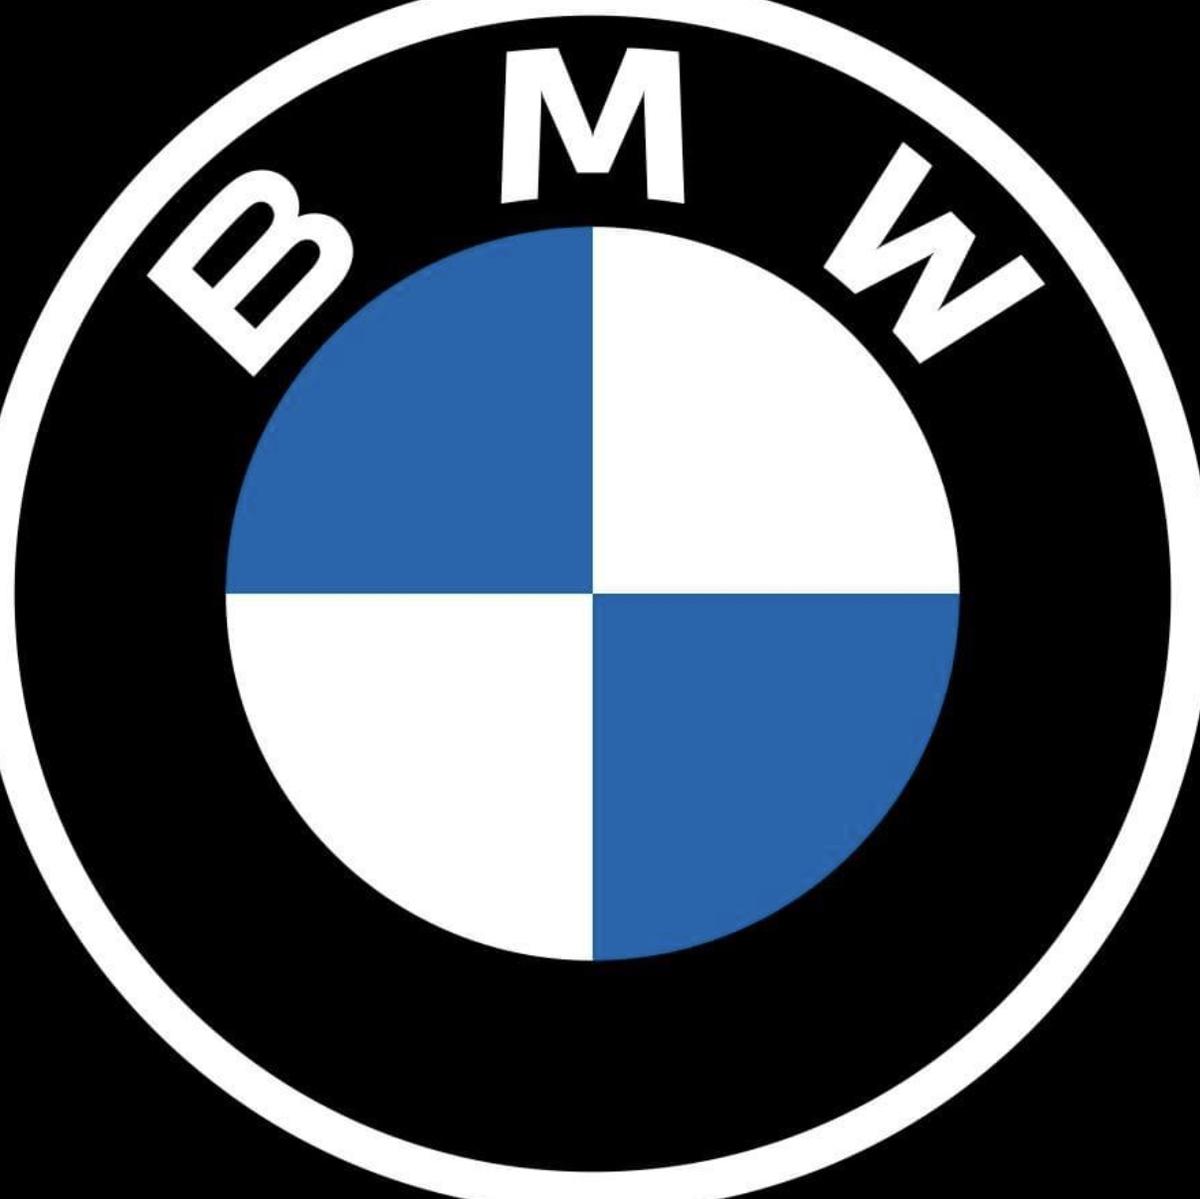 BMW of USA's images